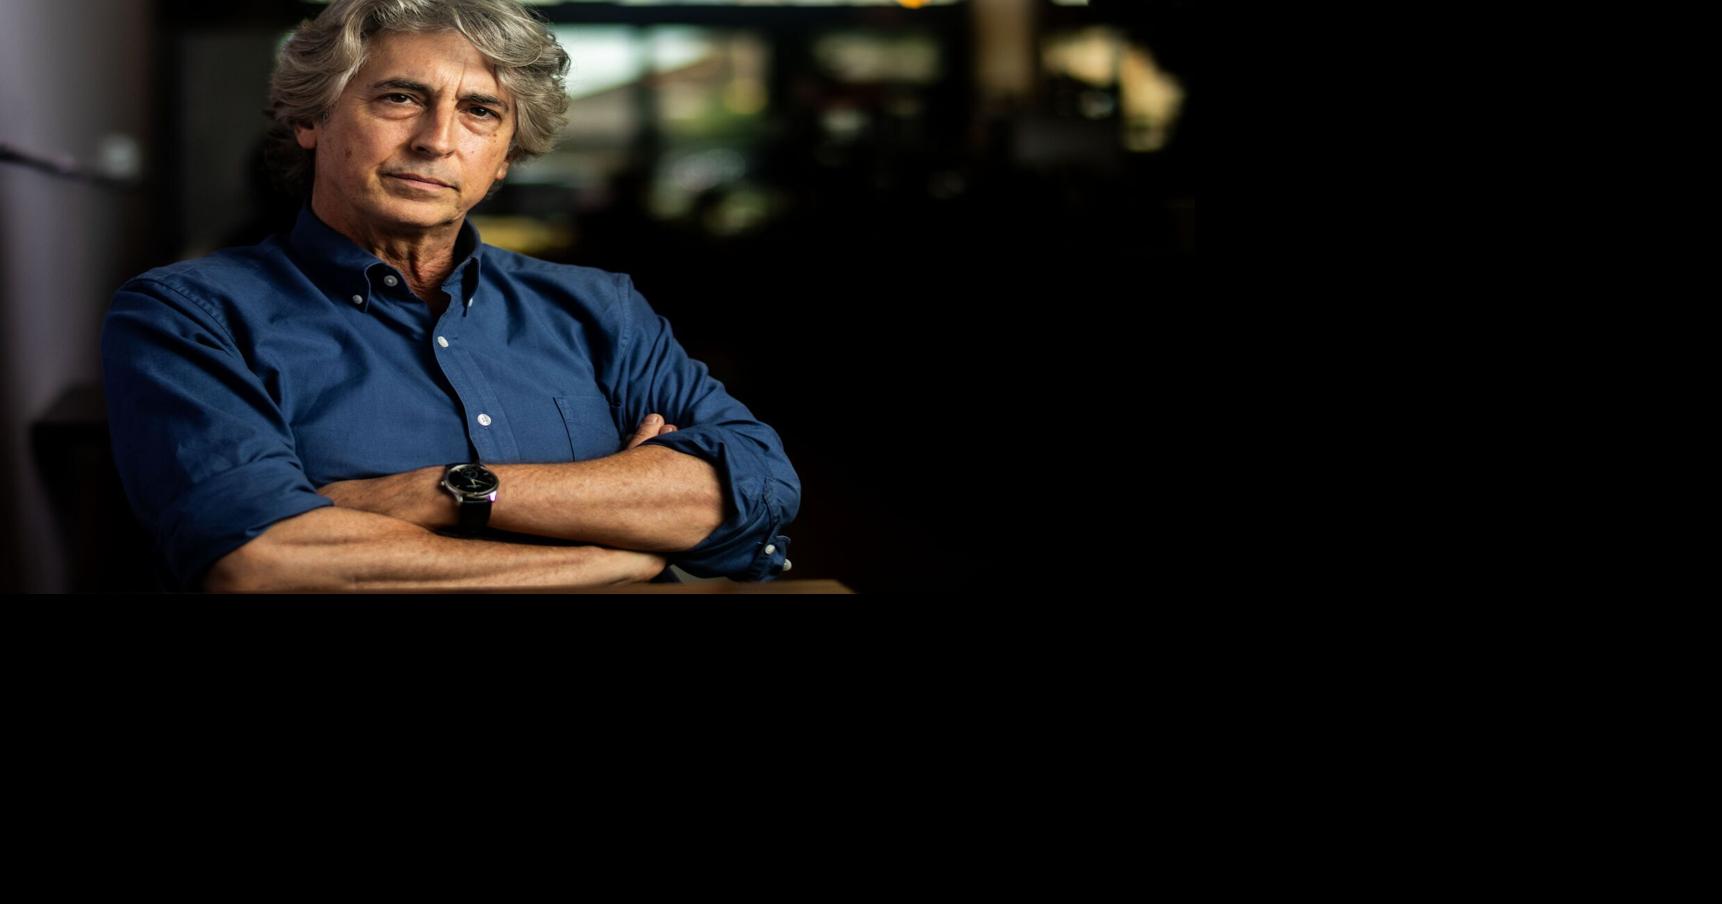 Alexander Payne and Gary Sanchez Productions Team on His Next Film